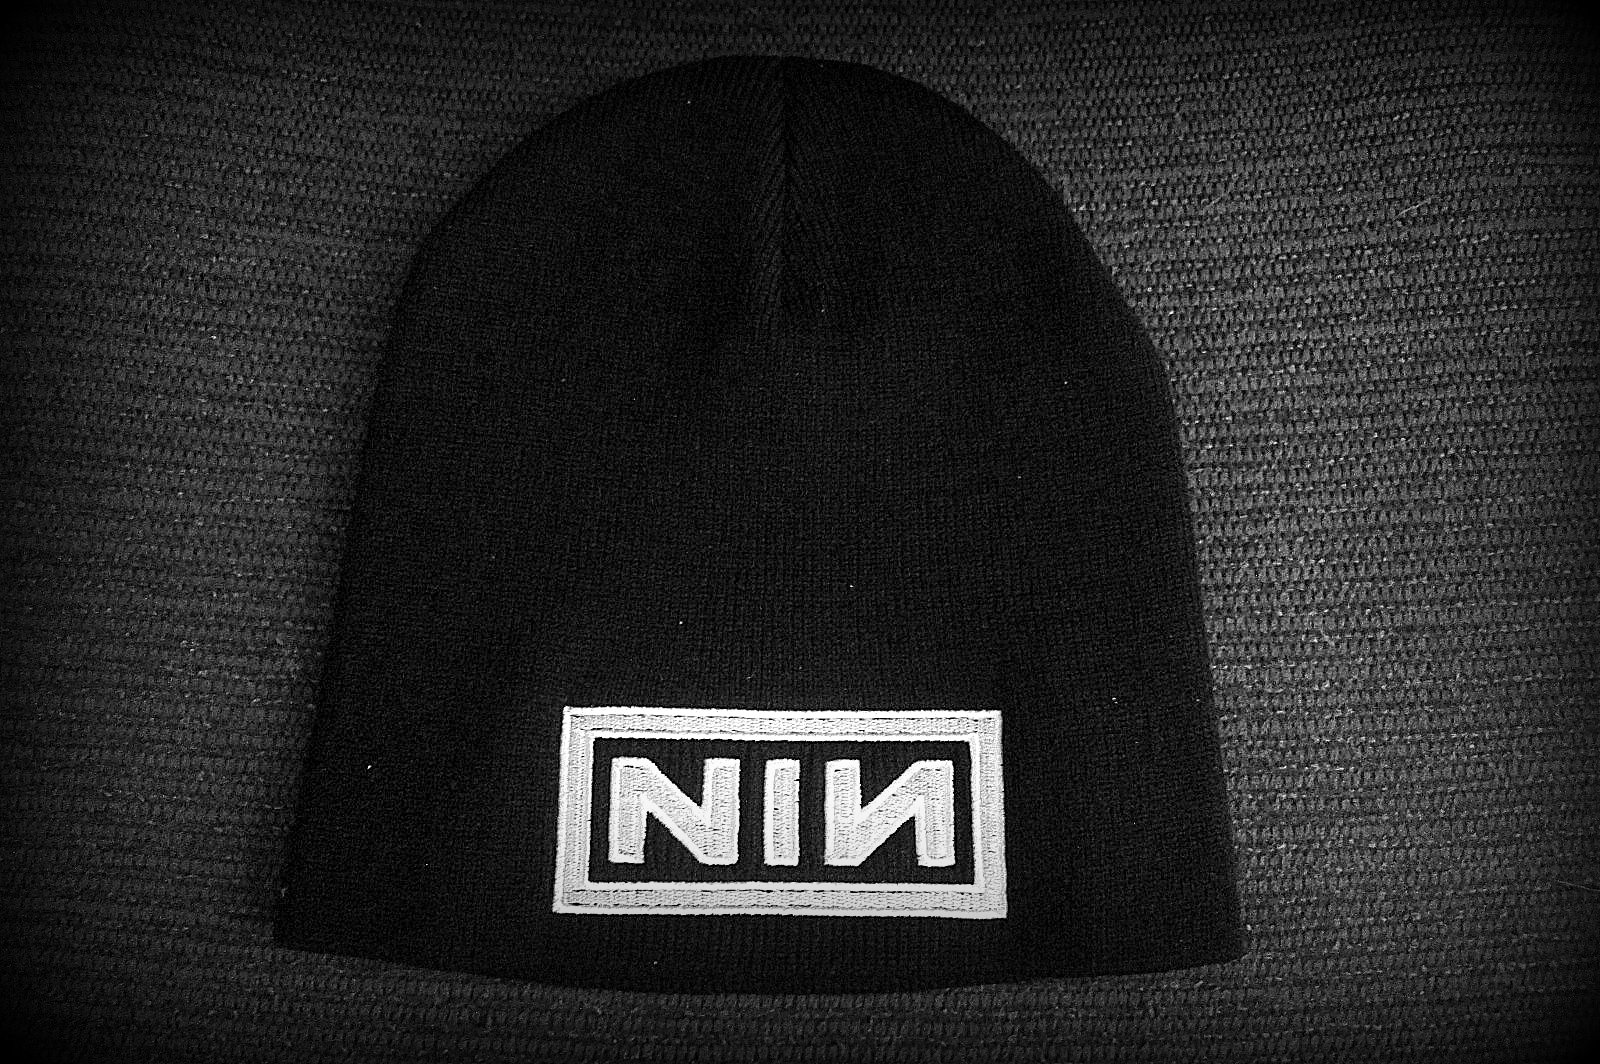 NINE INCH NAILS - -Embroidered - Logo - Stretchy 100% acrylic fabric provides a one-size-fits-all . Soft and light-weight beanie with slightly ribbed knit texture